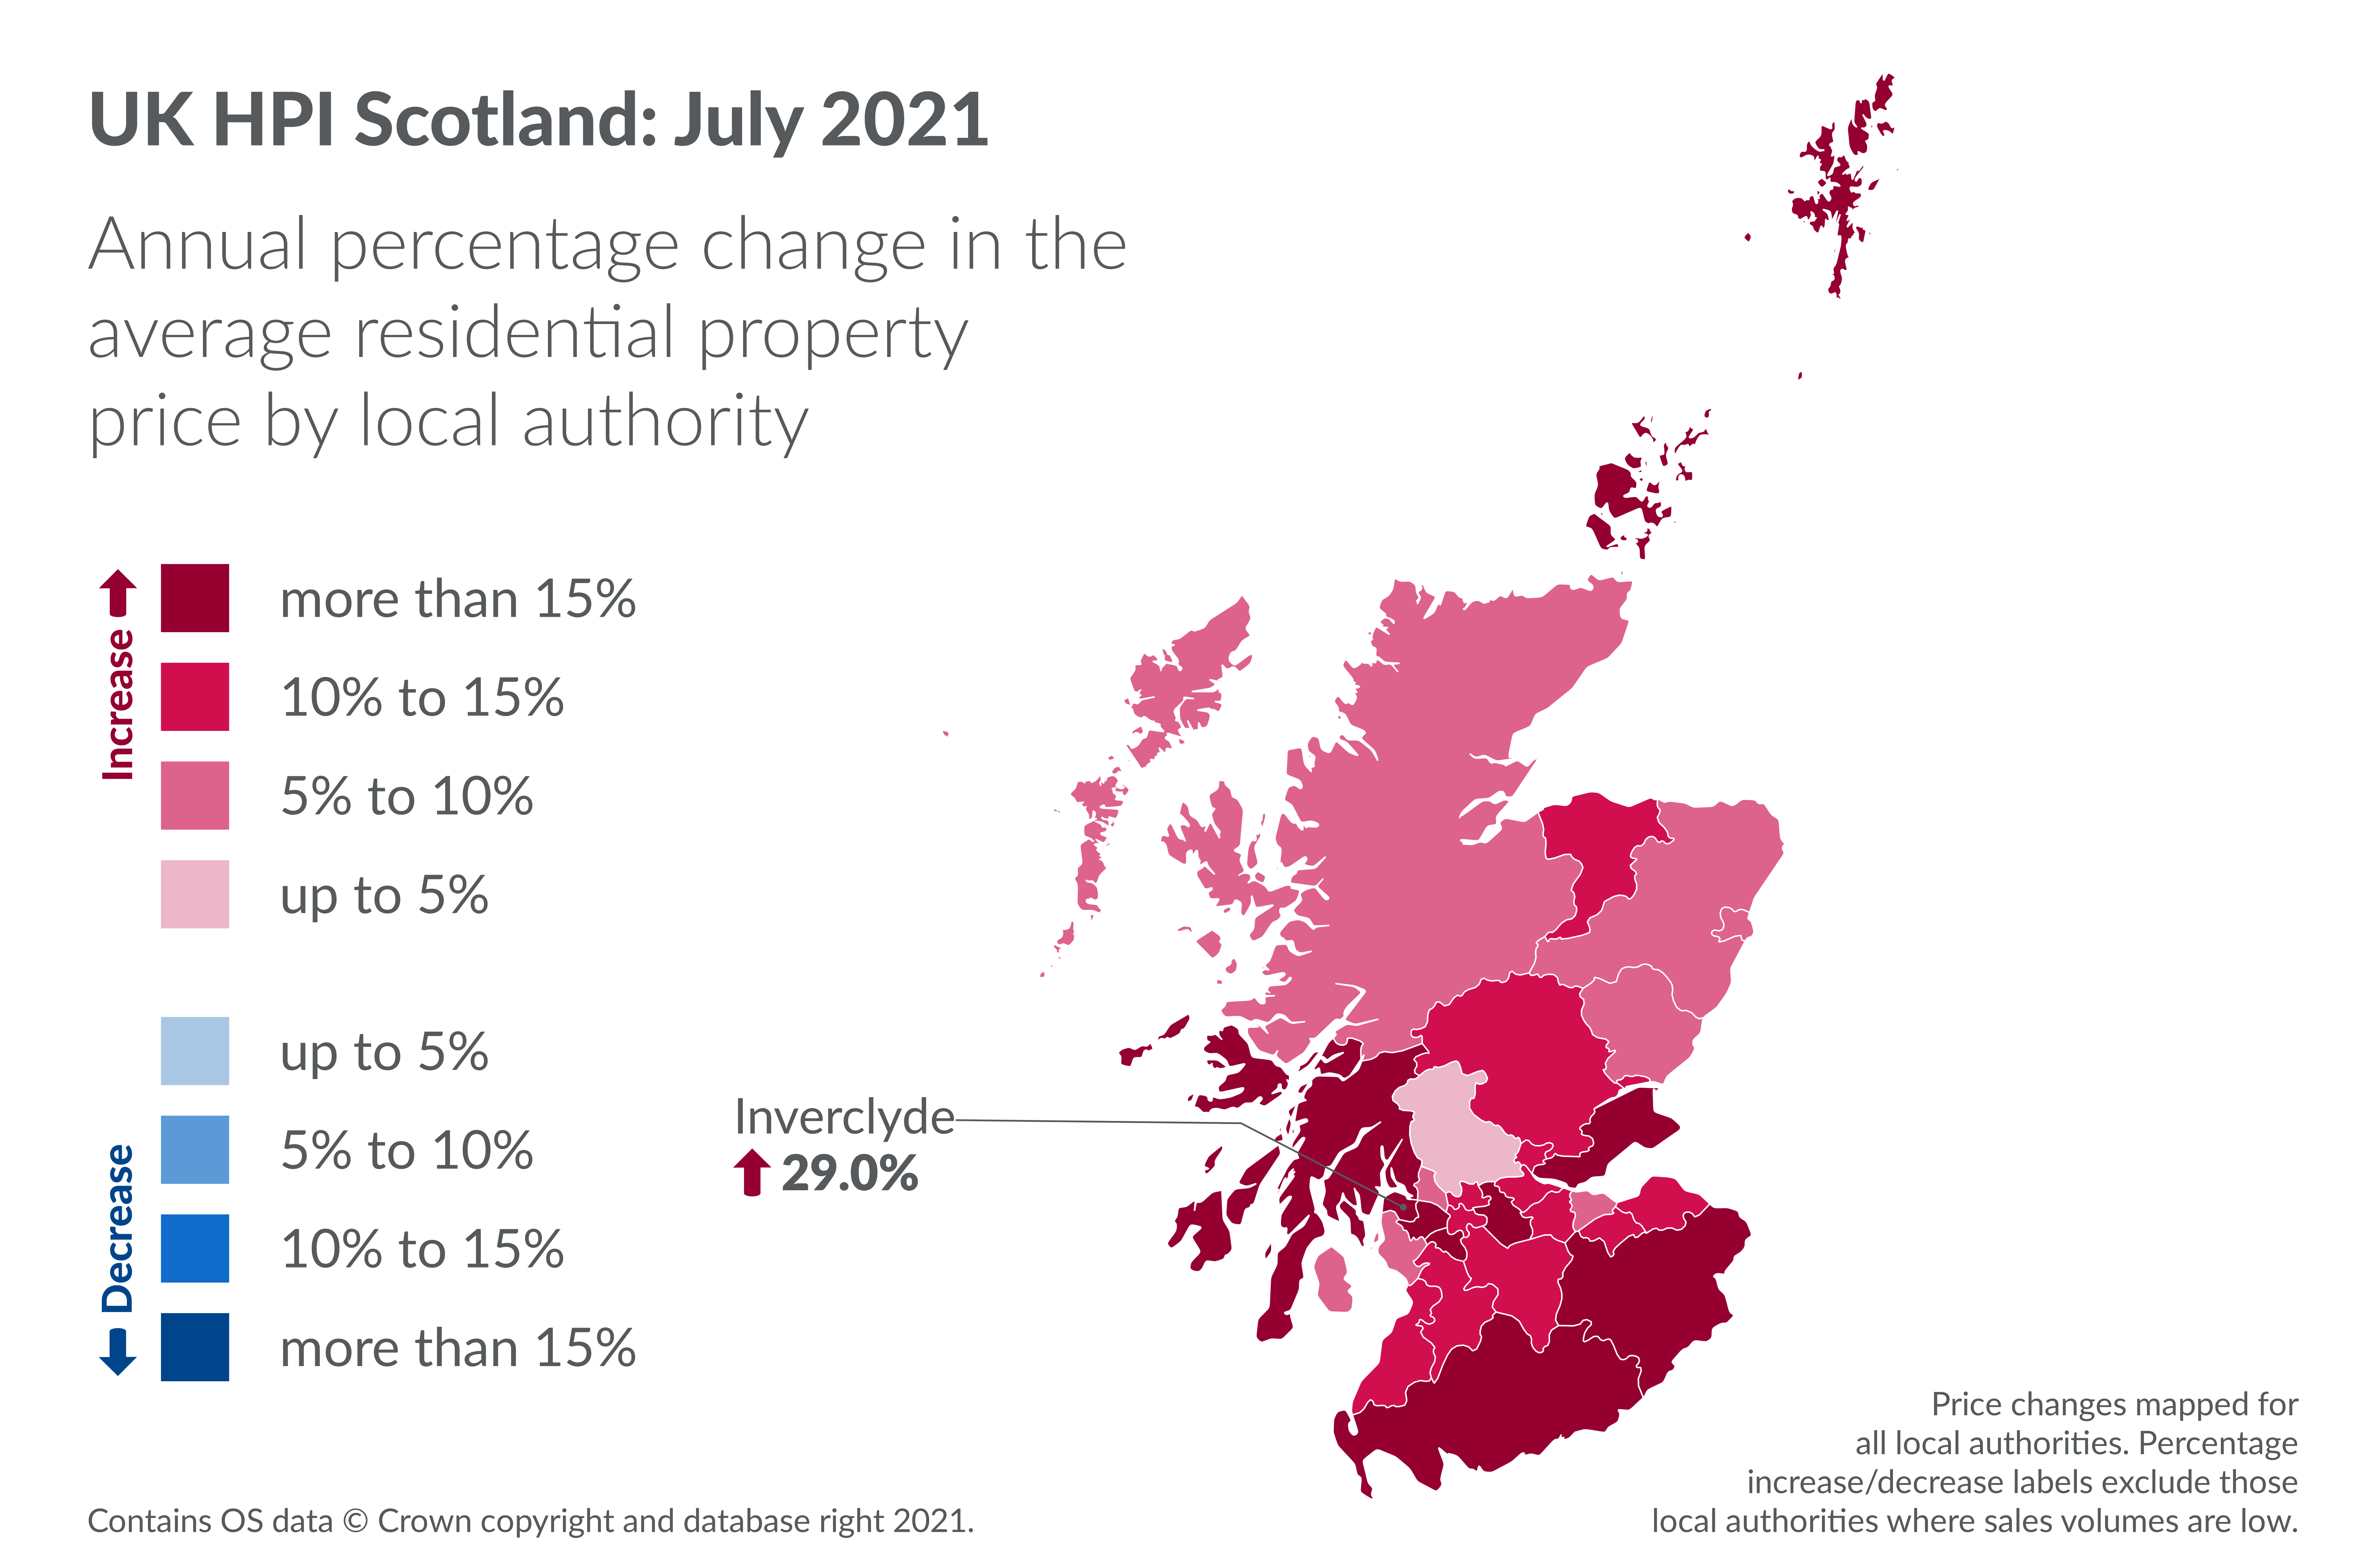 Map showing annual percentage change in the average residential property price by local authority